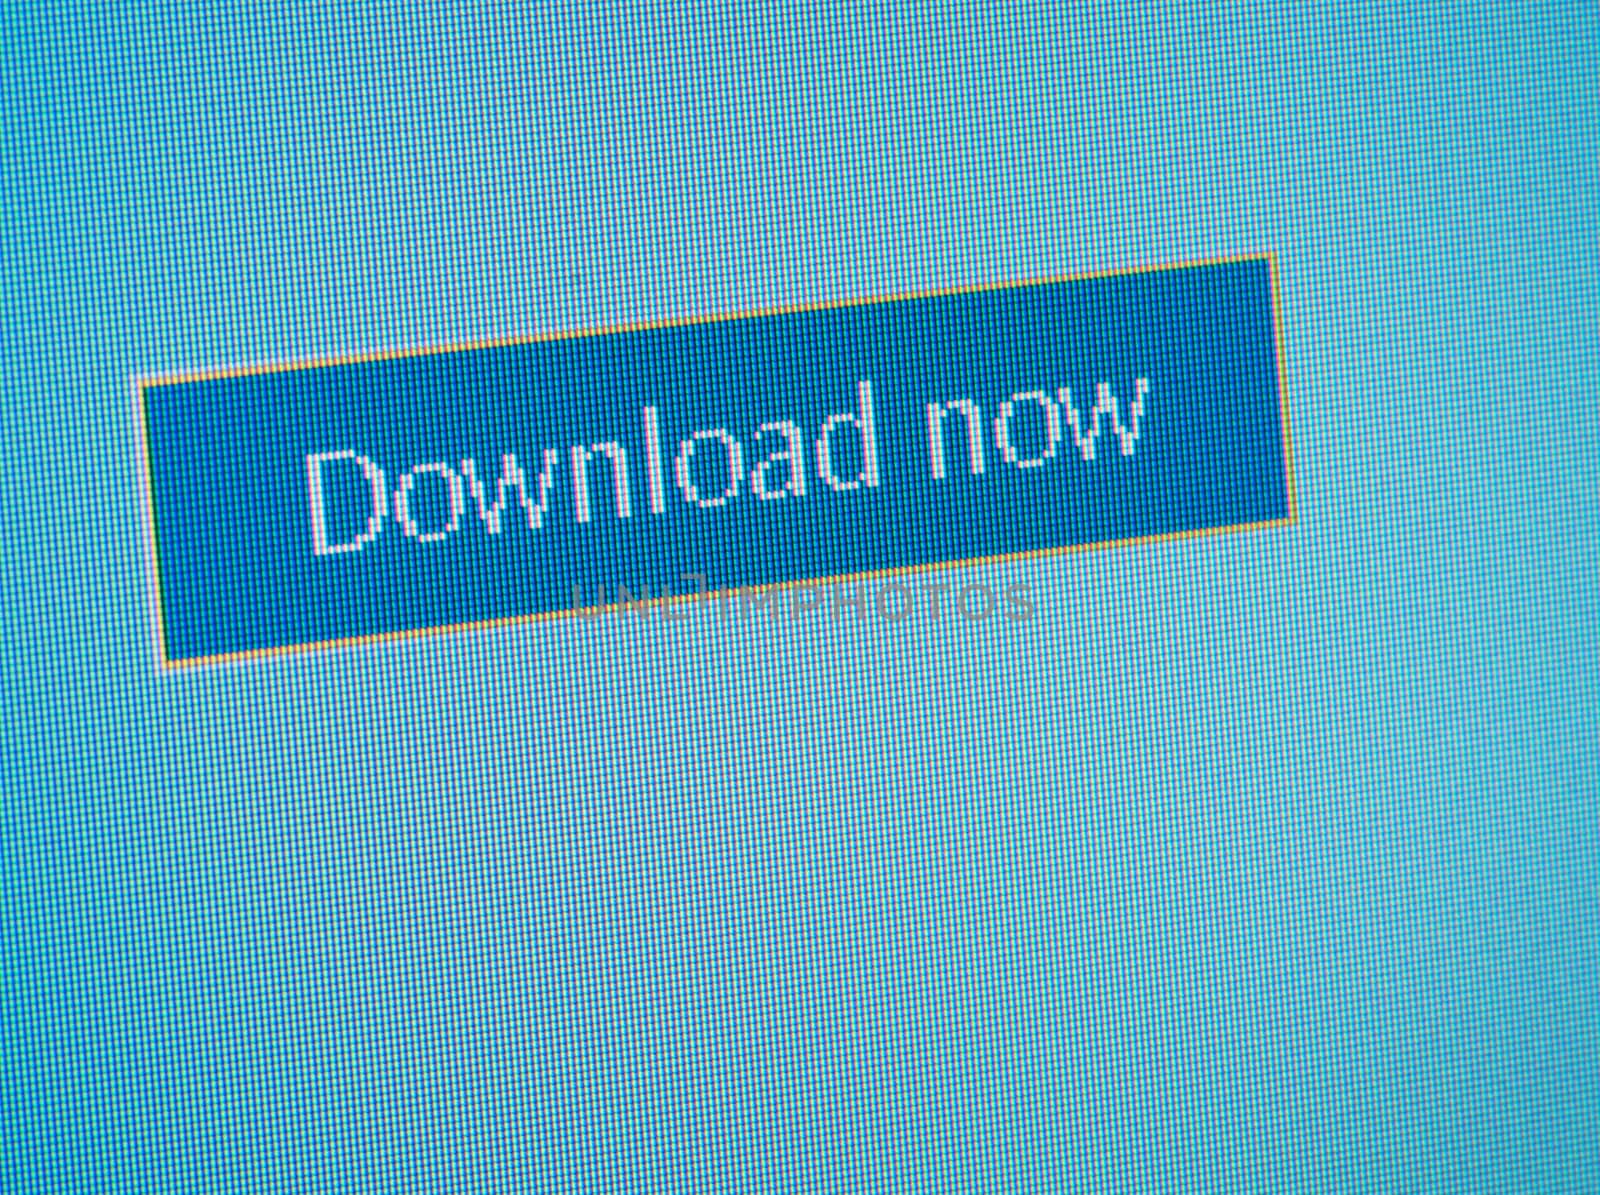 Download now button on the computer screen close-up.